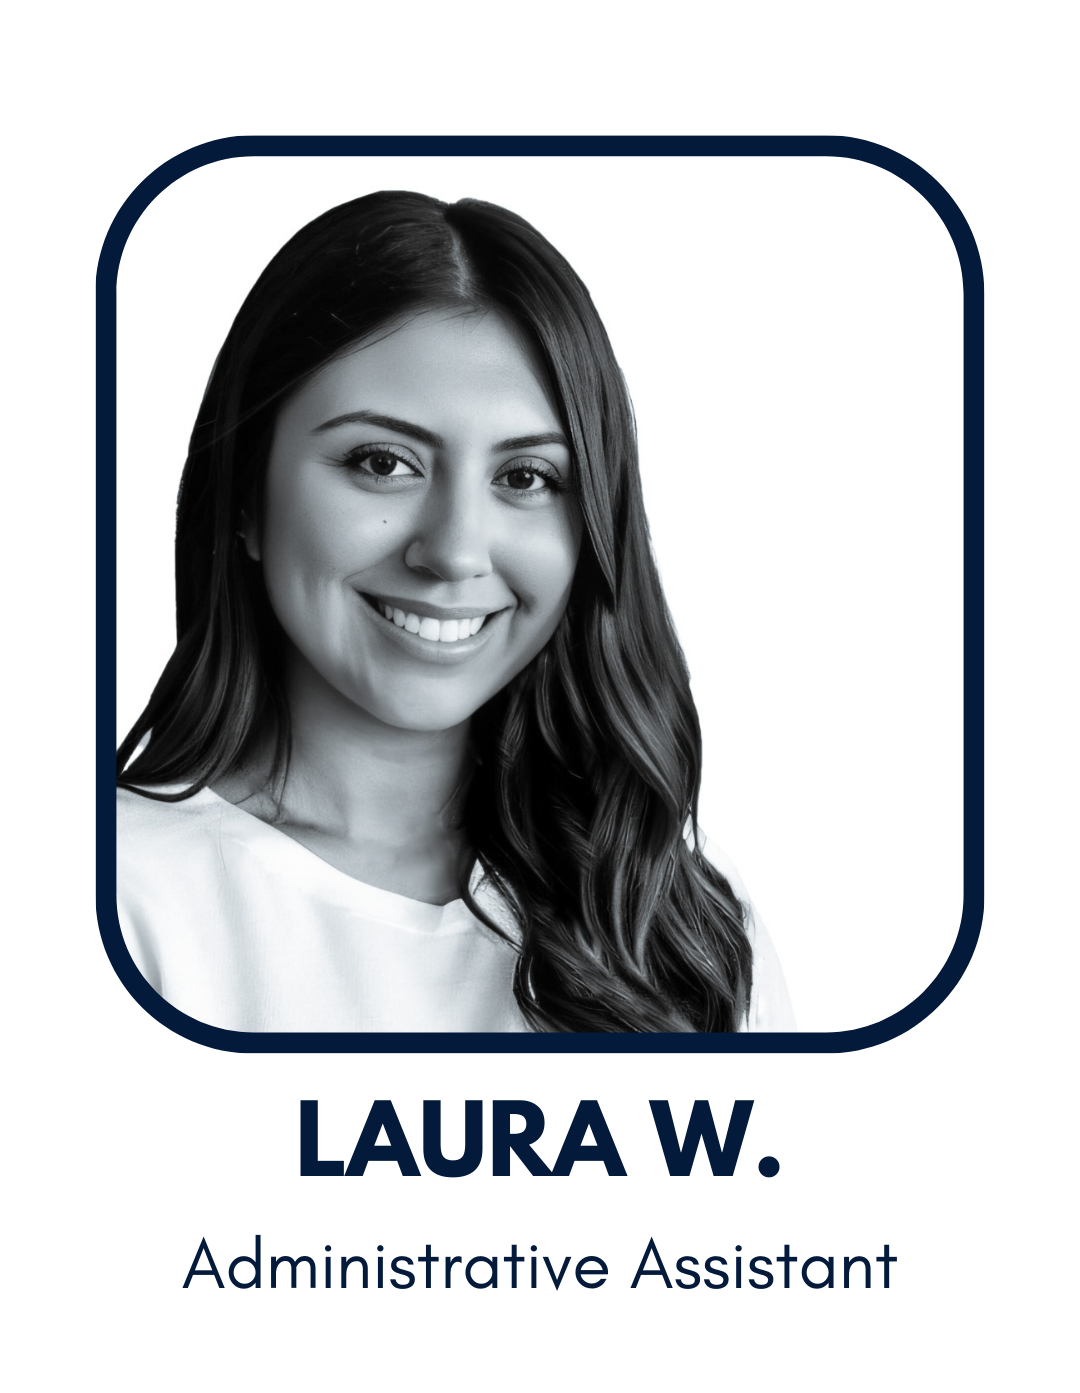 Laura W., administrative assistant at 4Dbiz. Specialties include invoicing support for interior designers, project management support for interior designers, and more.